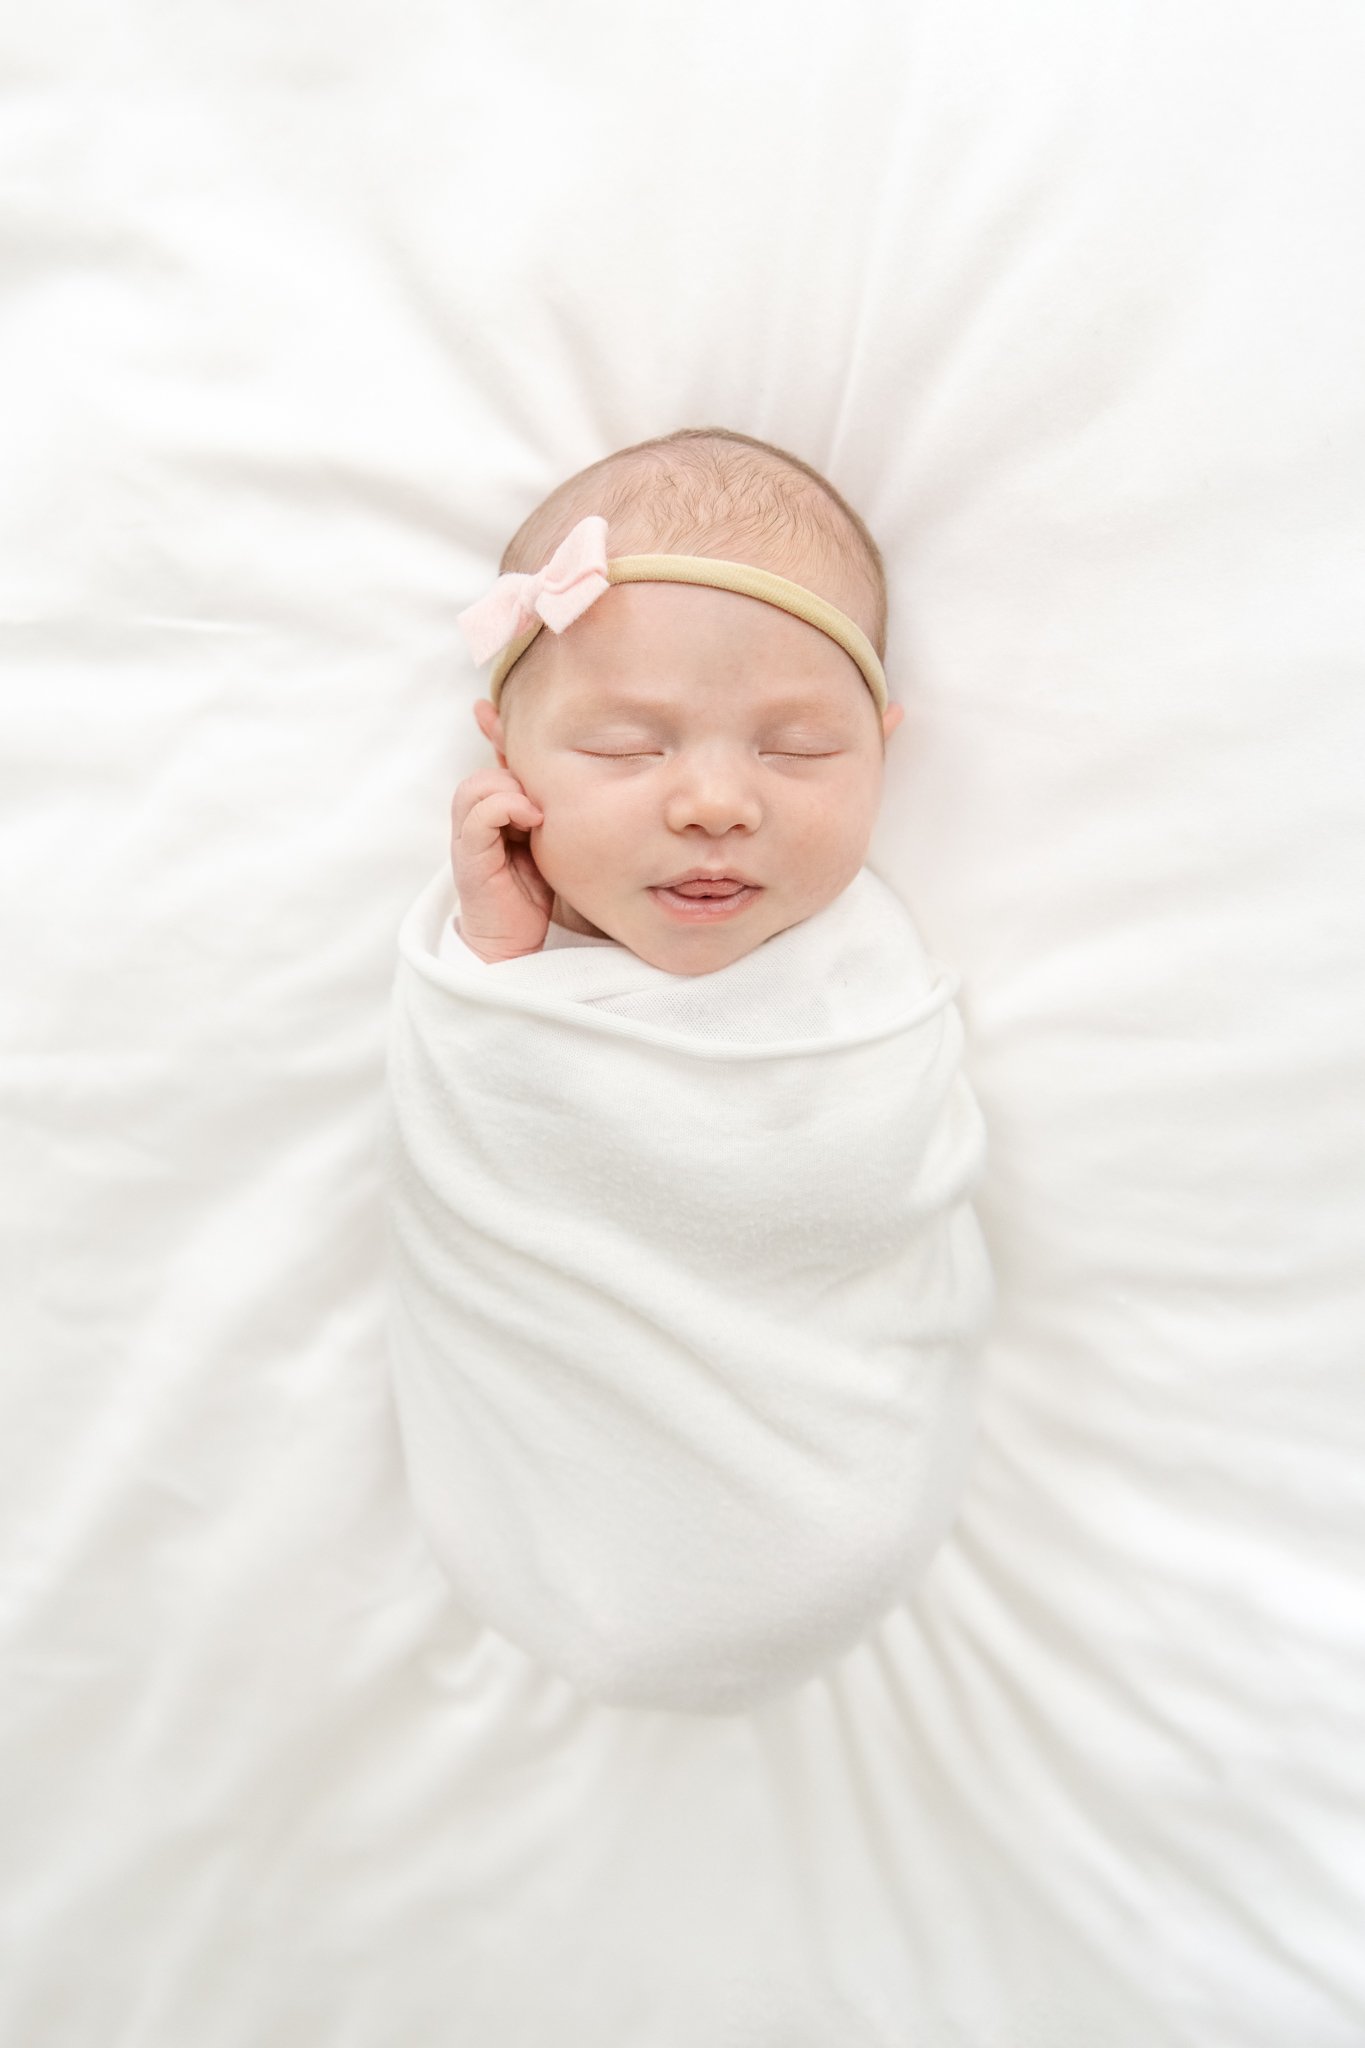  The newborn baby girl portrait was taken during an at-home session with Nicole Hawkins Photography a professional newborn photographer. baby portraits sleeping pink bow swaddle blanket #NicoleHawkinsPhotography #NicoleHawkinsNewborns #Babygirl #Newb